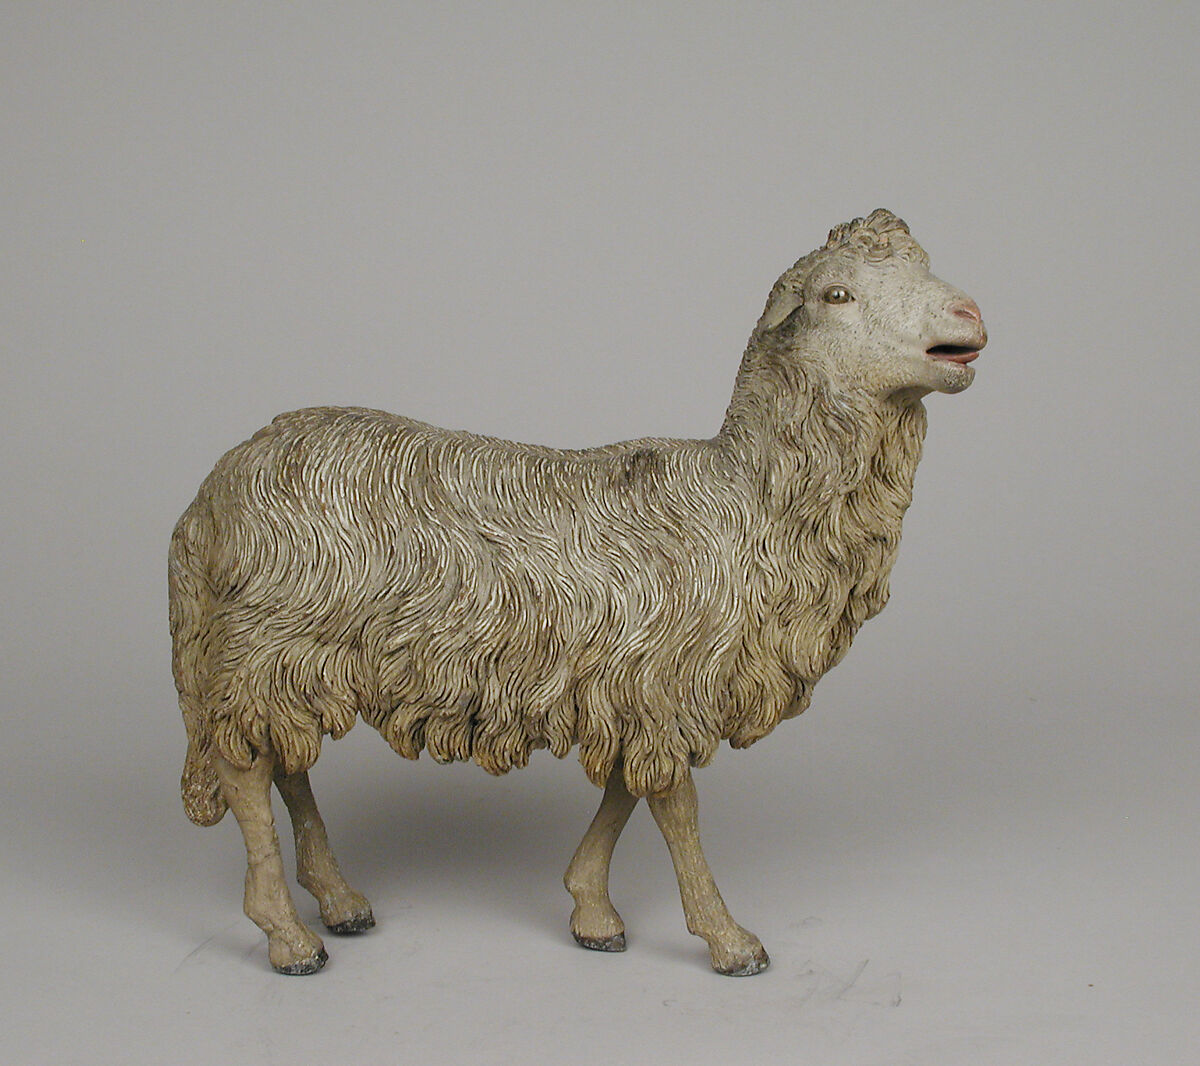 Standing sheep, Polychromed terracotta body, lead ears and legs